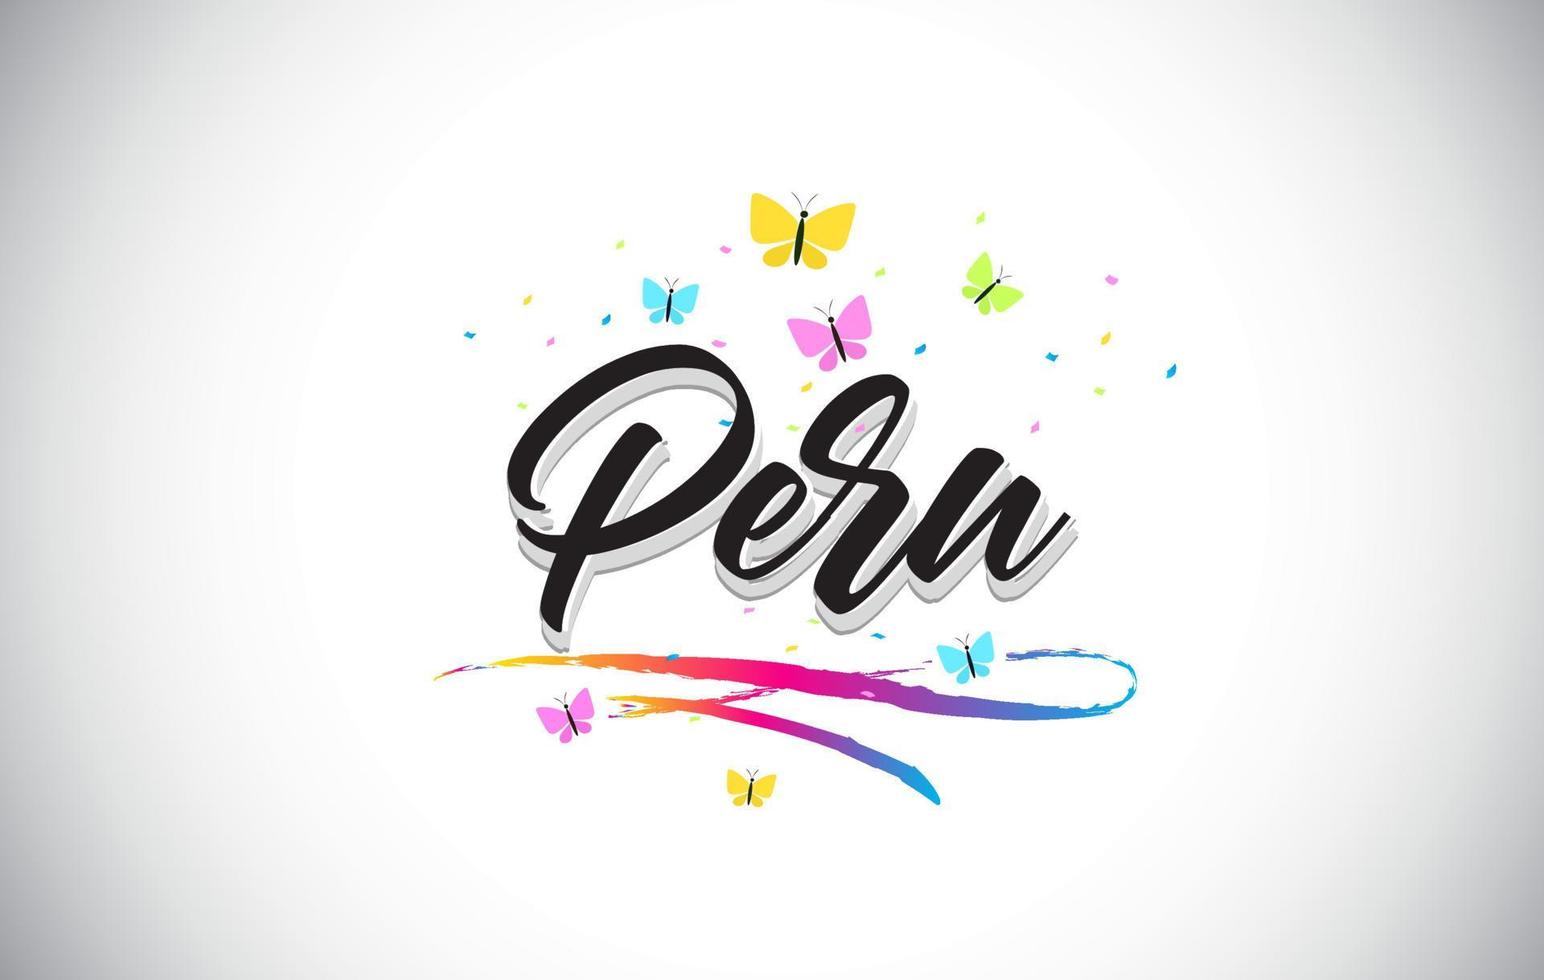 Peru Handwritten Vector Word Text with Butterflies and Colorful Swoosh.